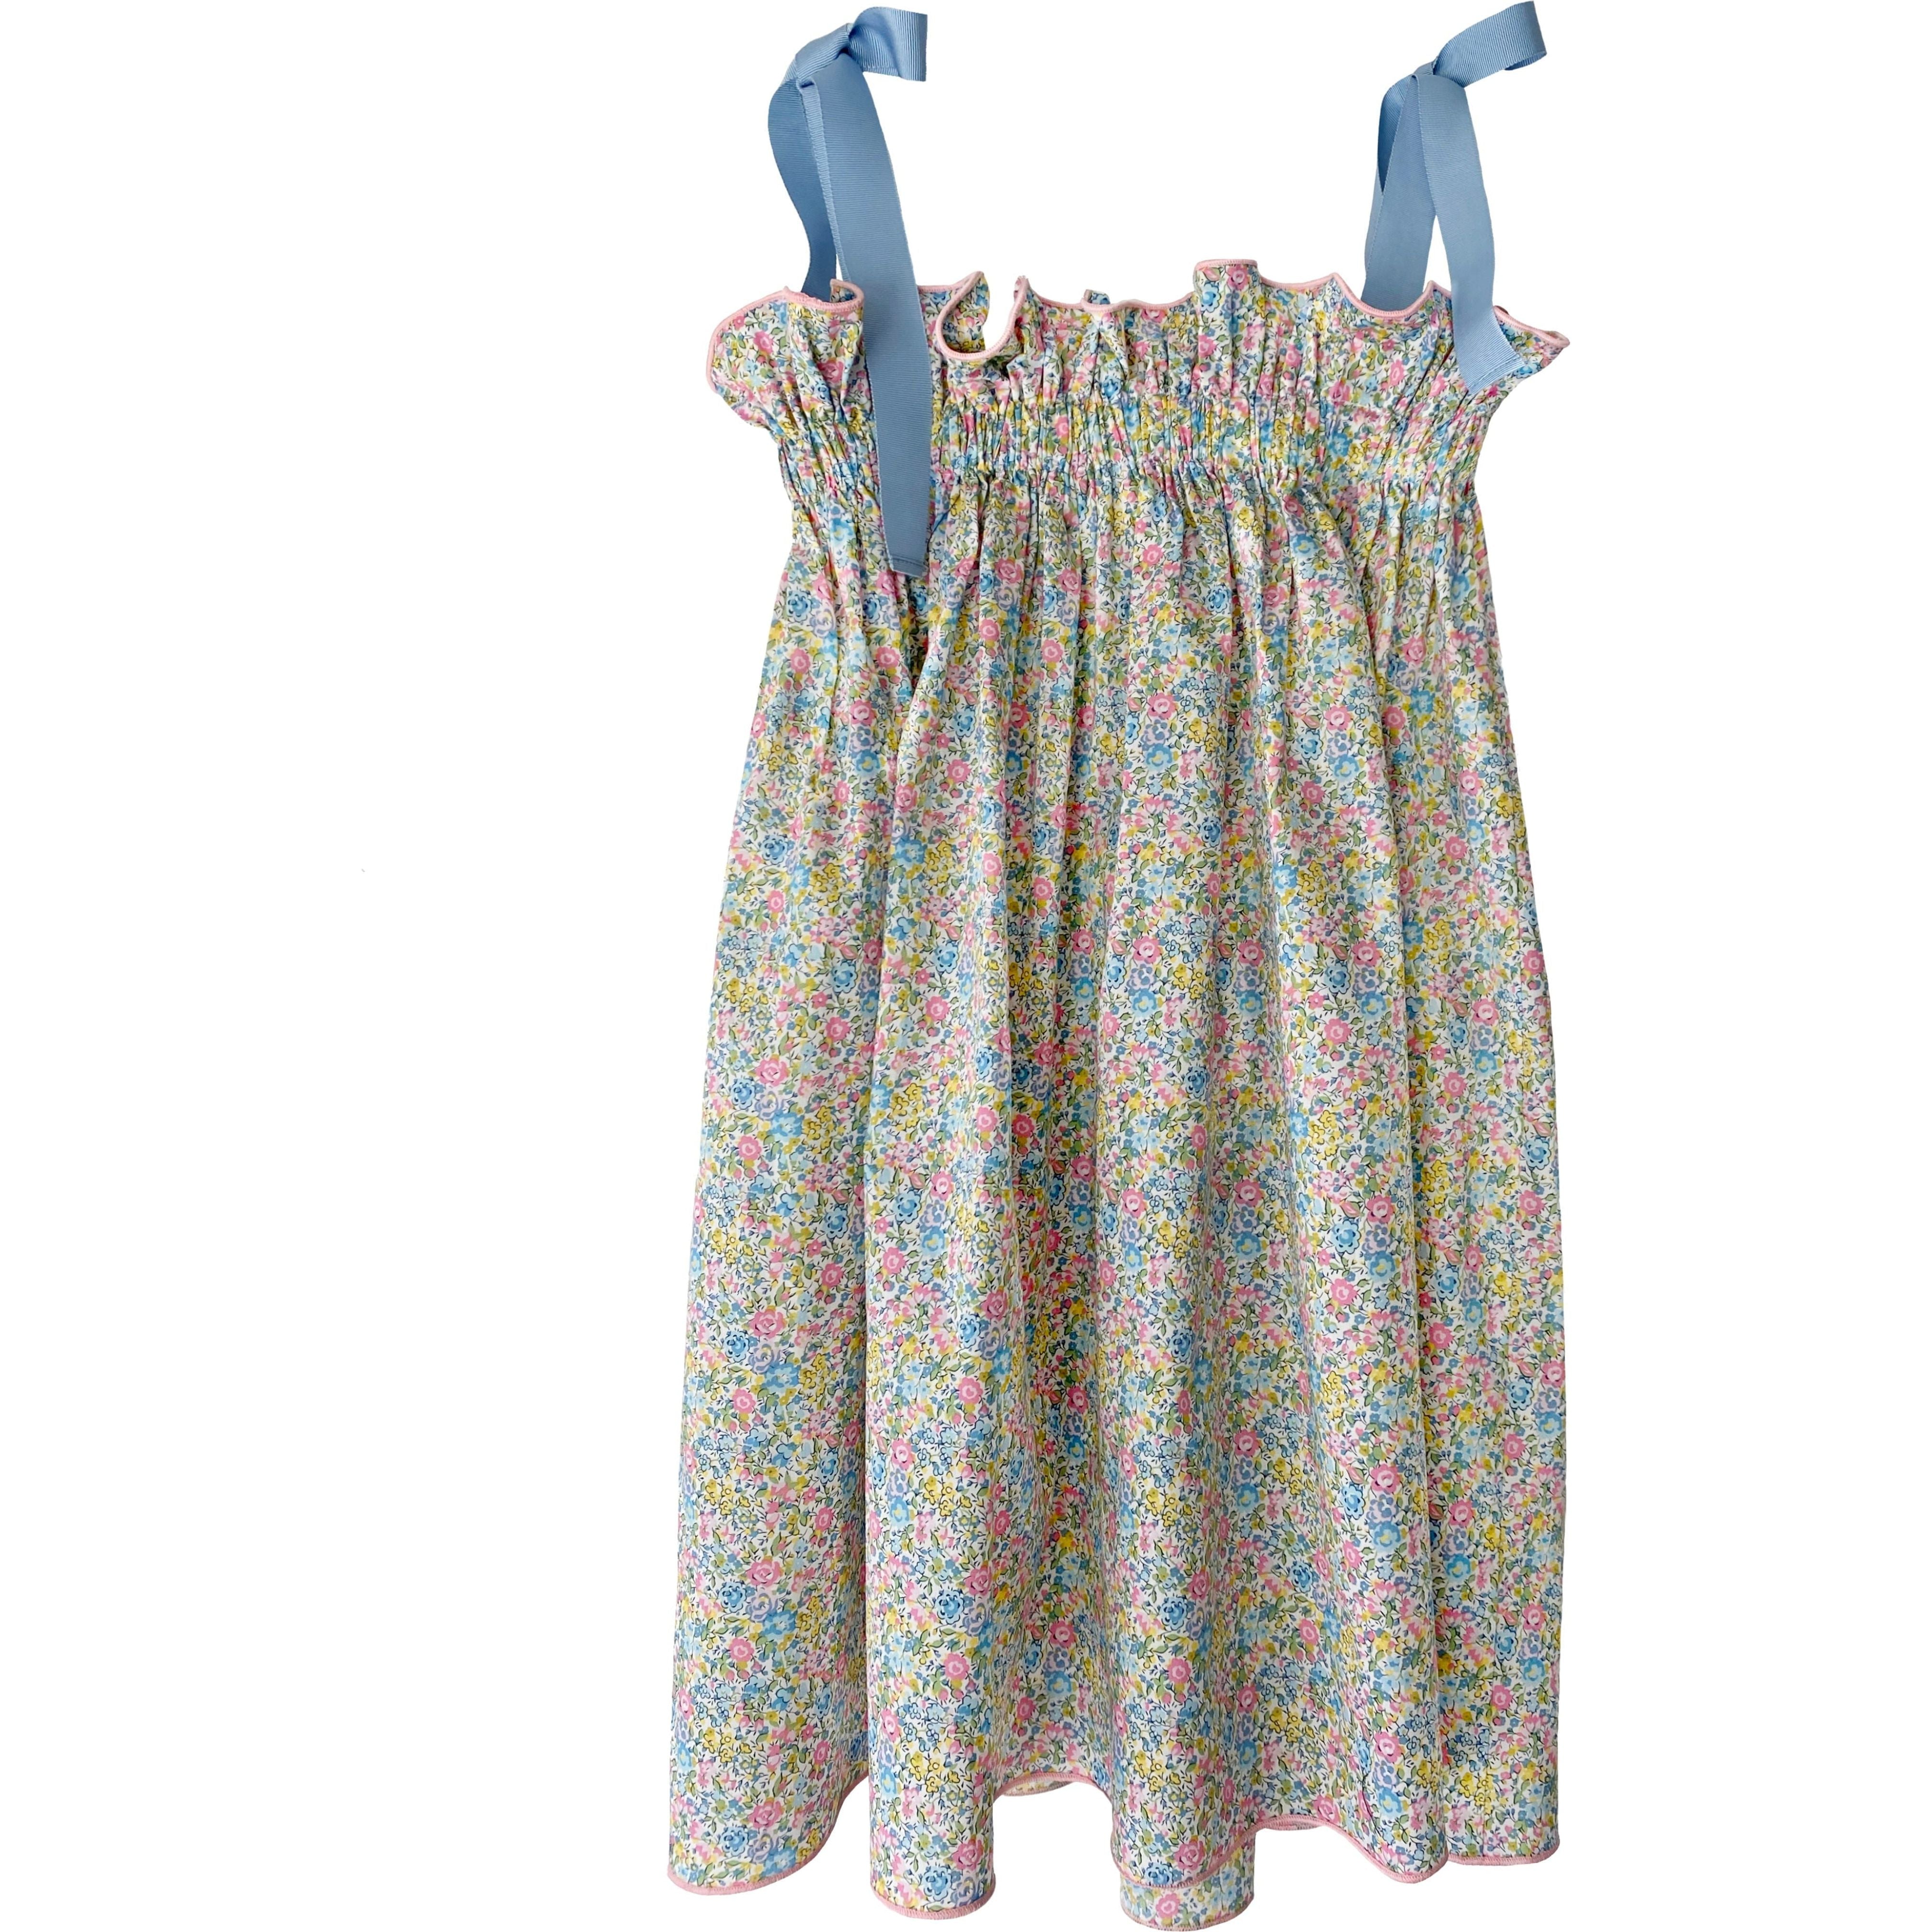 Girls' Jaime Dress in Pastel Ditsy Floral by Casey Marks